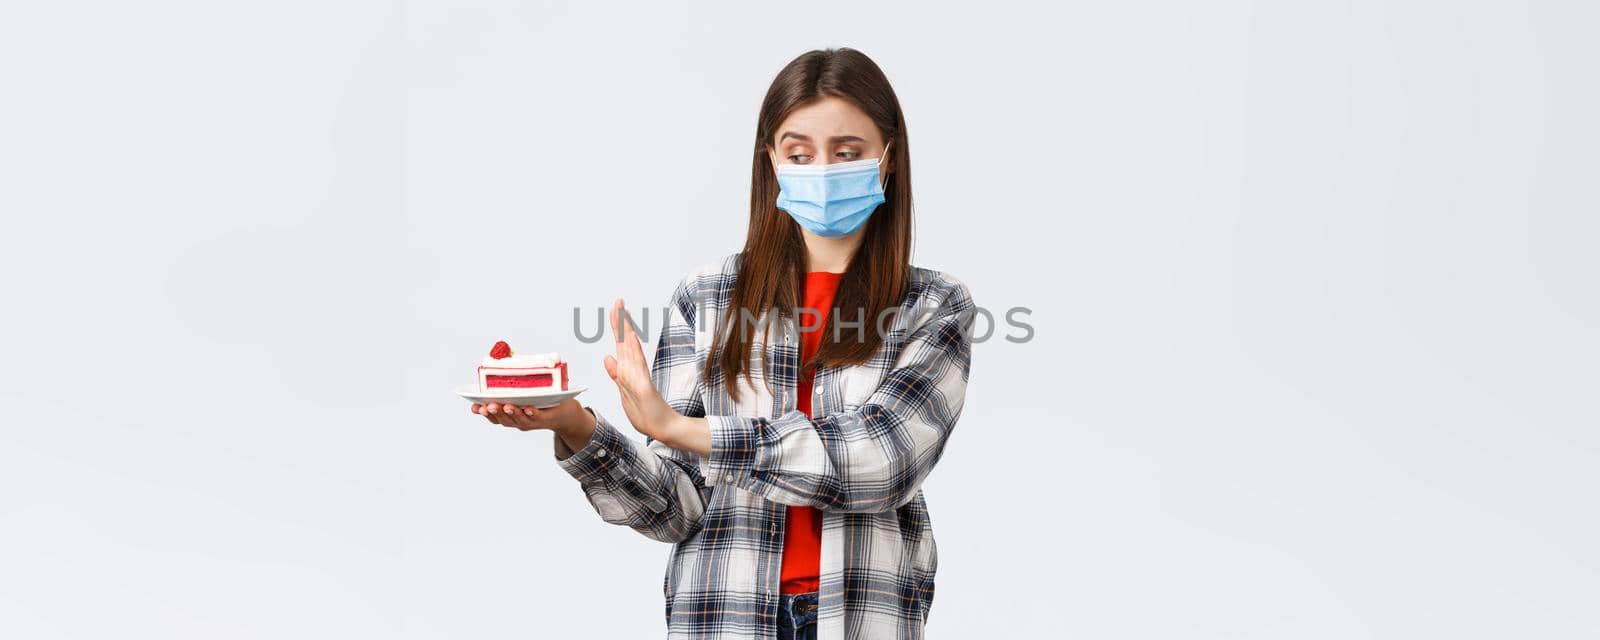 Coronavirus outbreak, lifestyle during social distancing and holidays celebration concept. Displeased and reluctant cute girl in medical mask refuse eat cake, show stop sign at dessert.